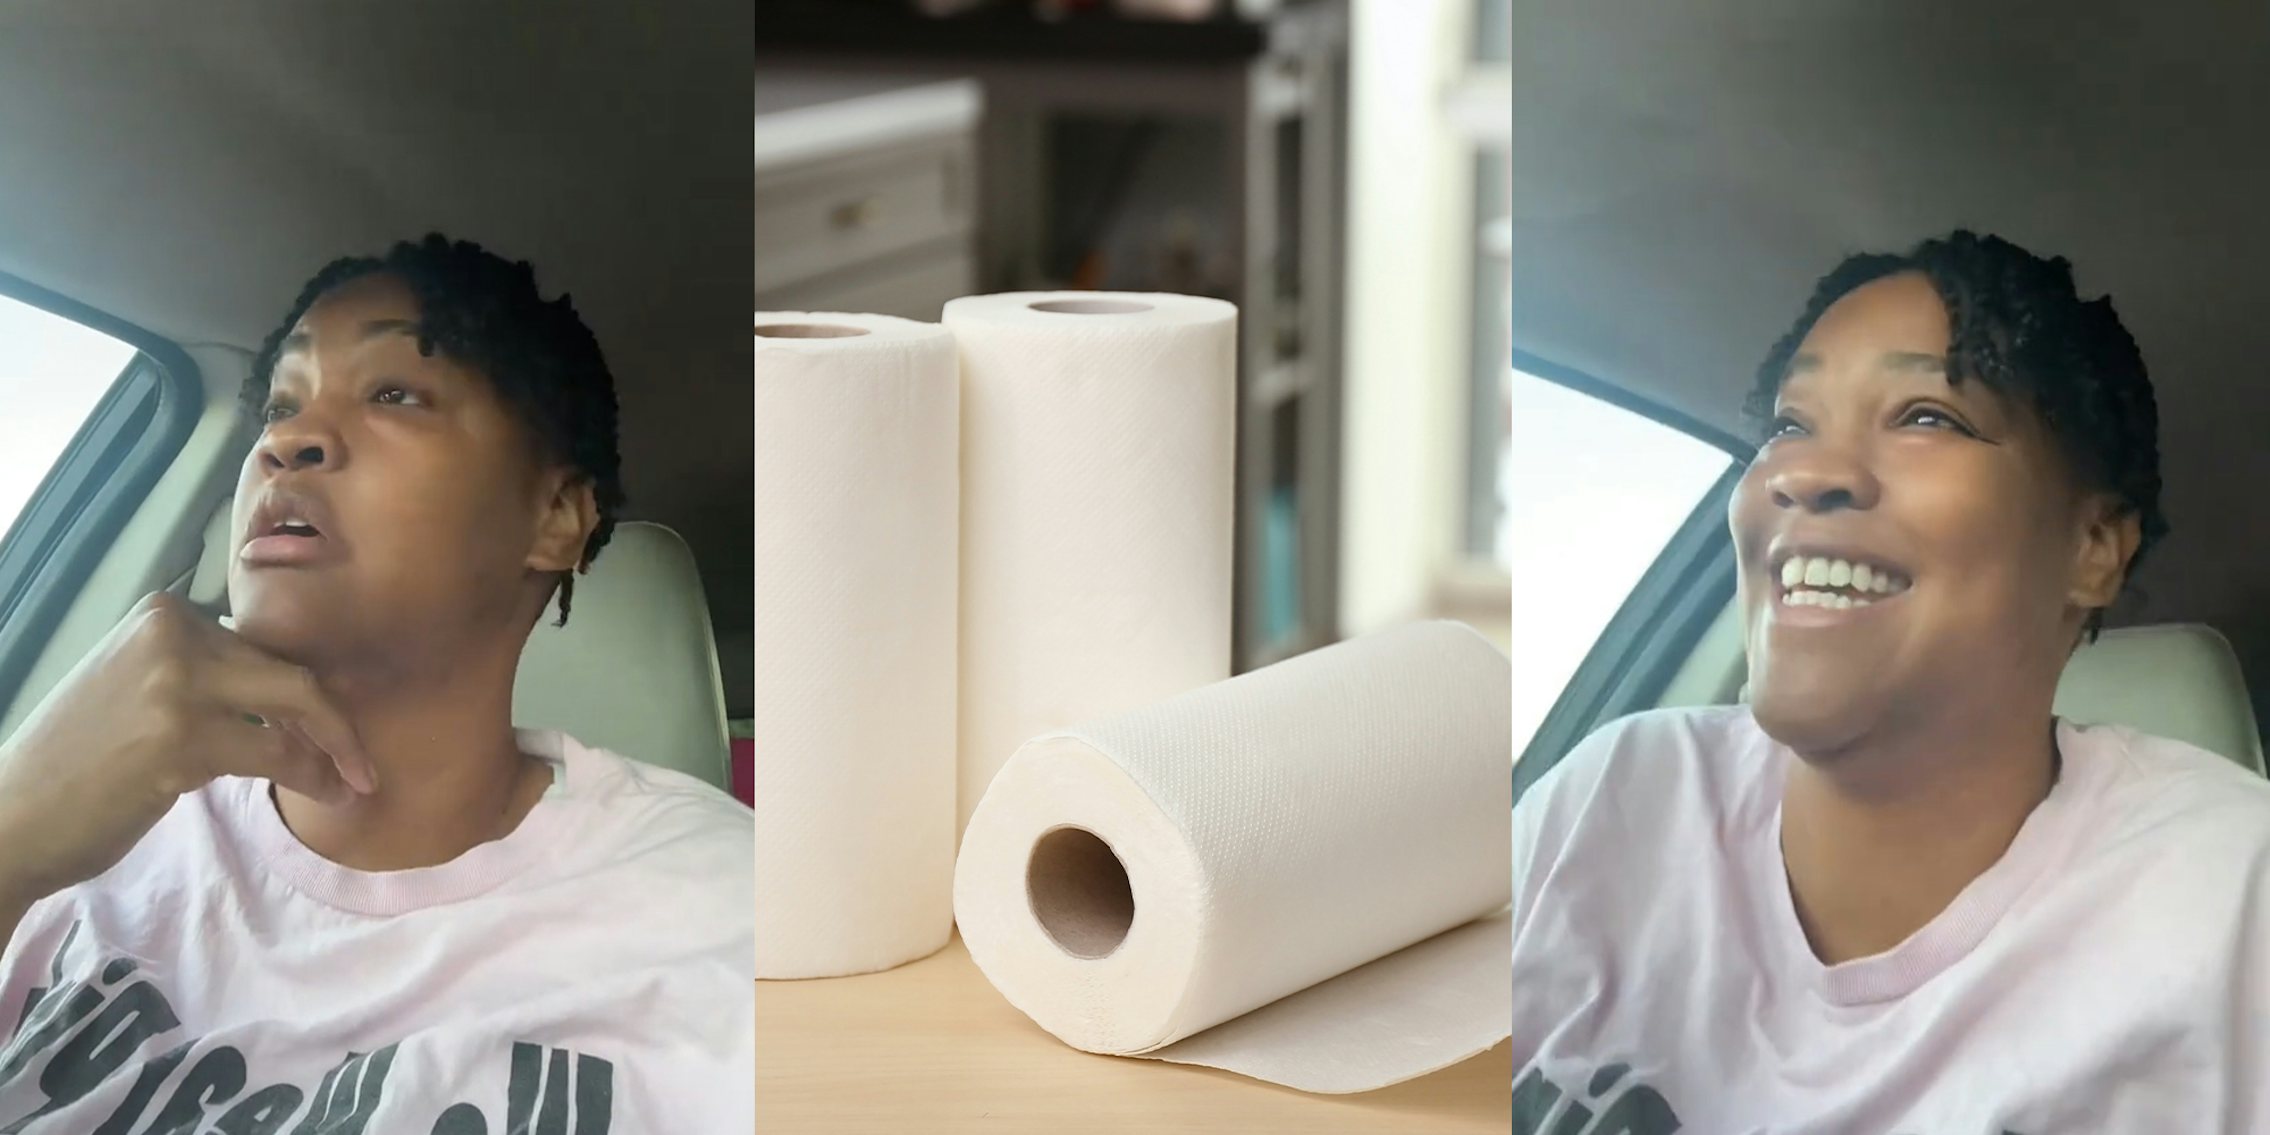 Black woman sharing Company secret: Paper towels are so gross actually